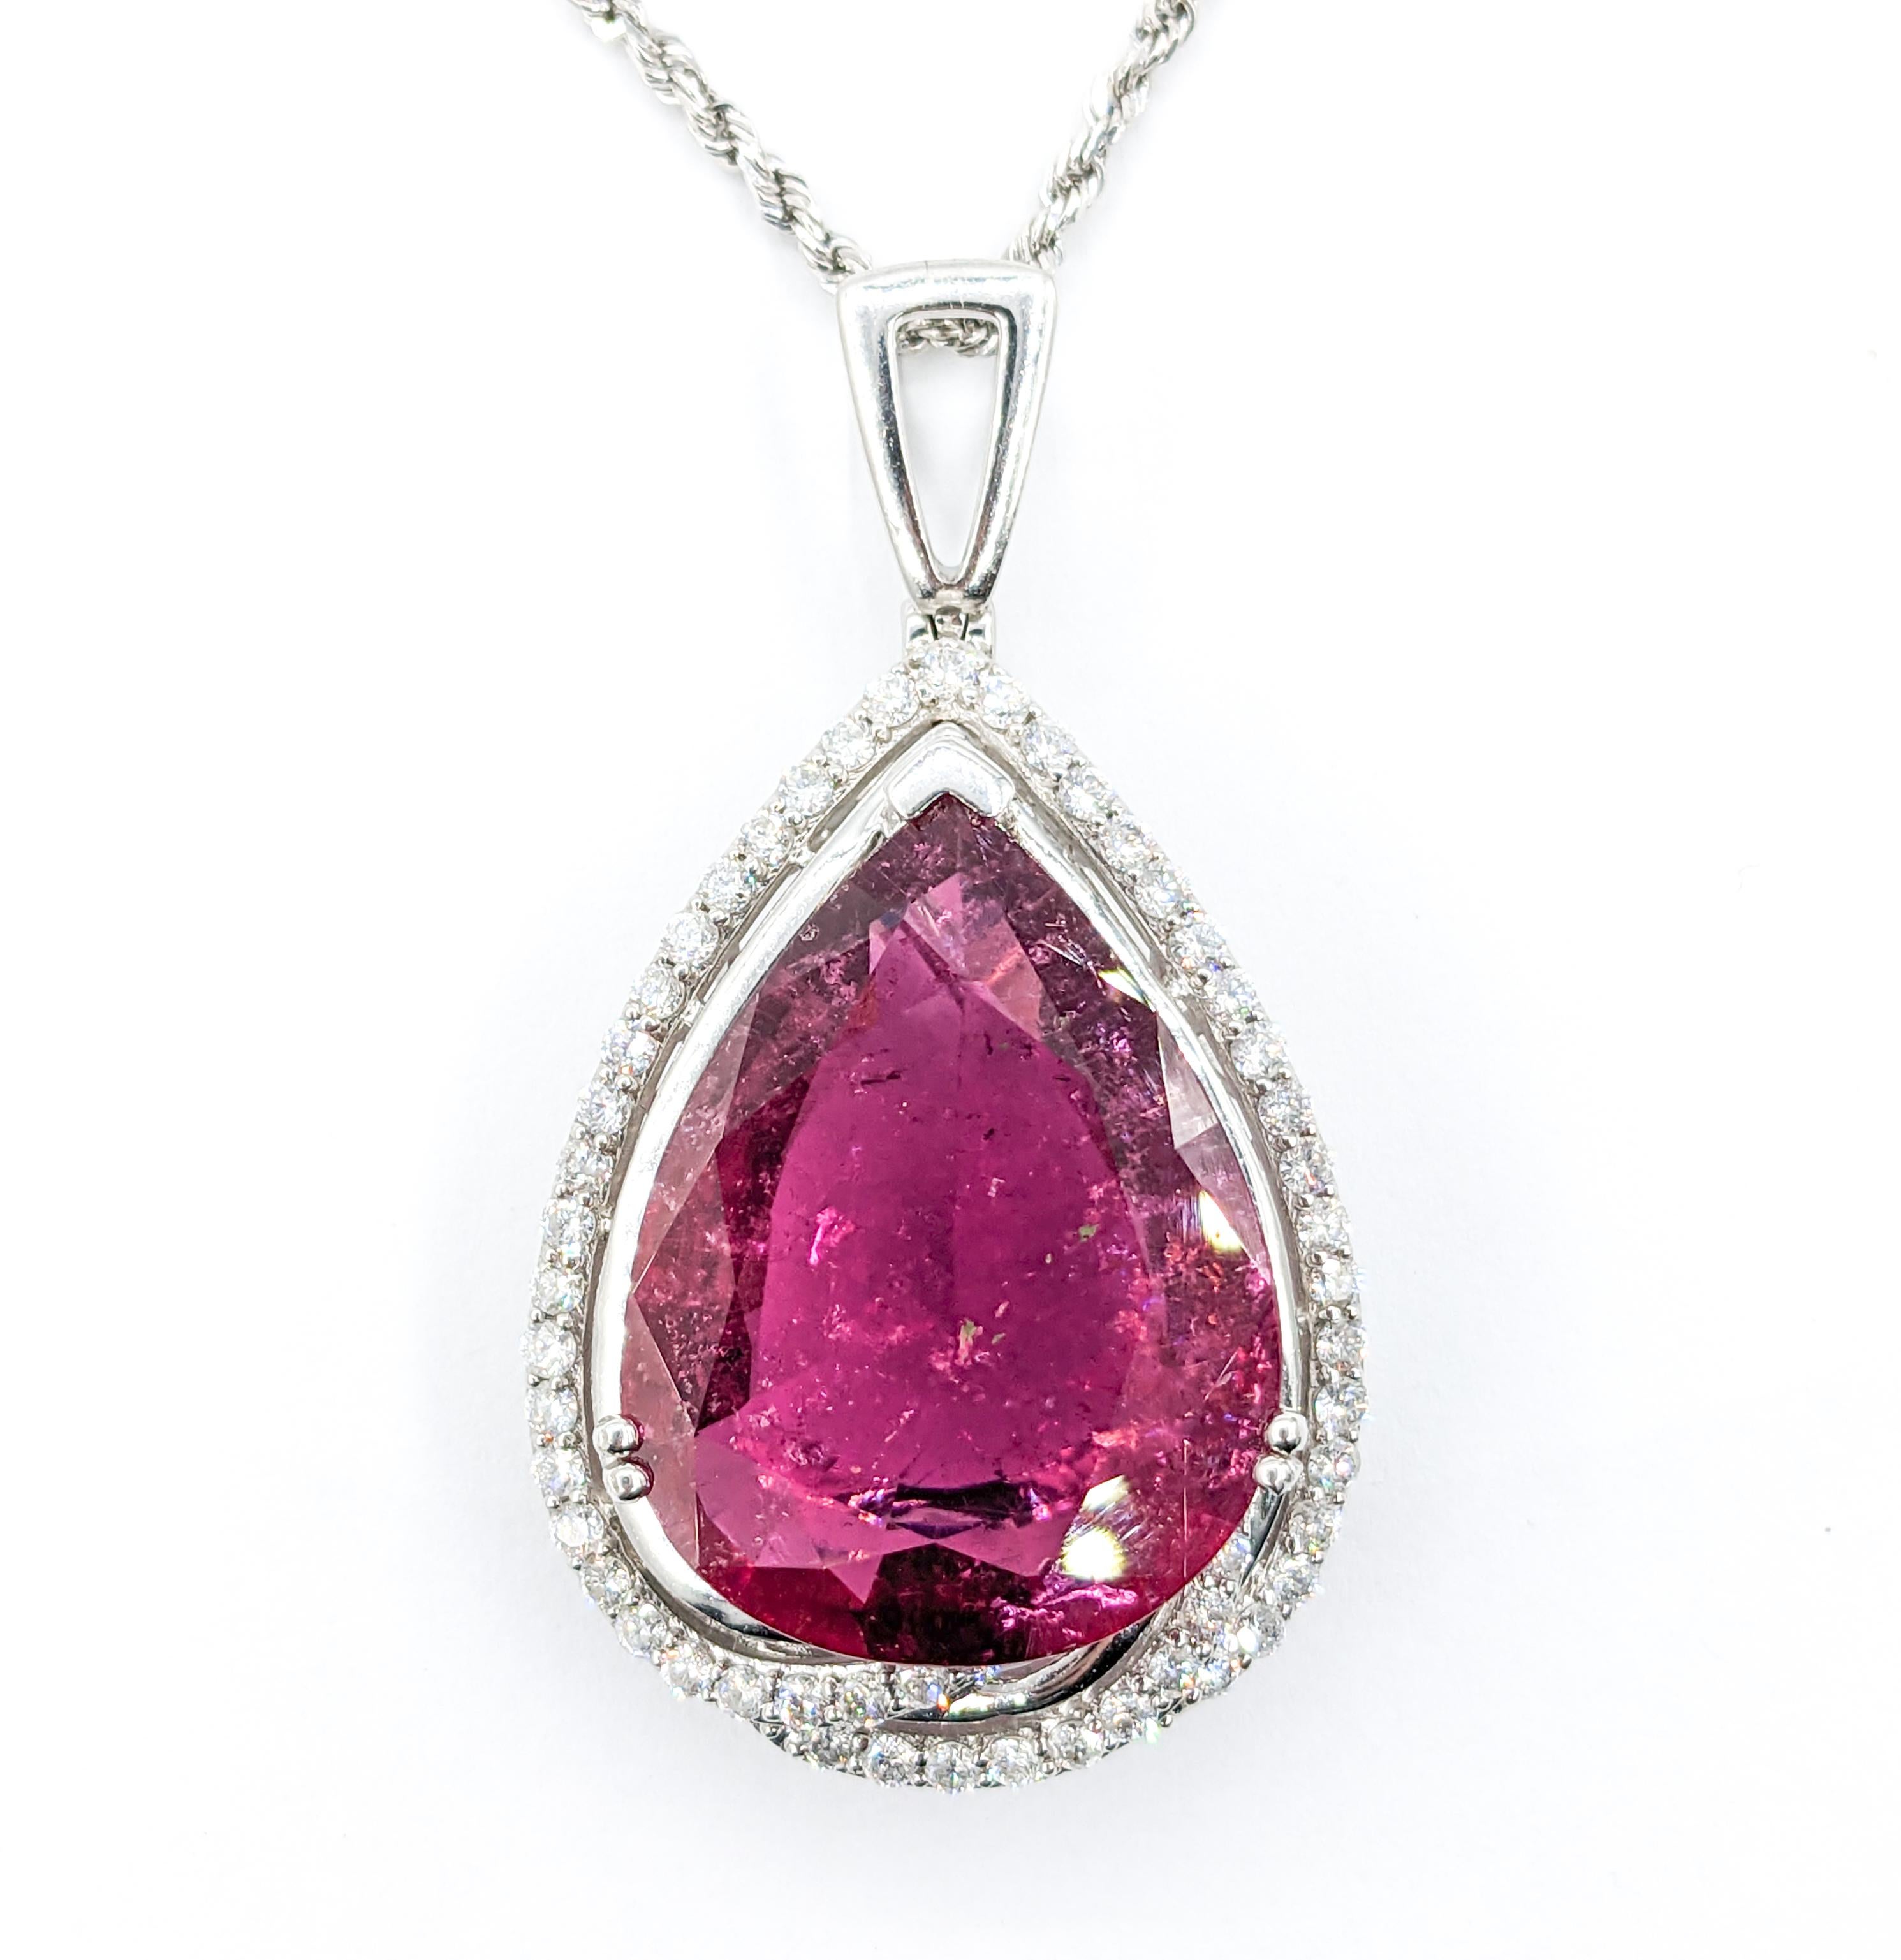 35.75ct Pink GIA Rubellite Tourmaline Pear & Diamond Necklace In Platinum For Sale 1